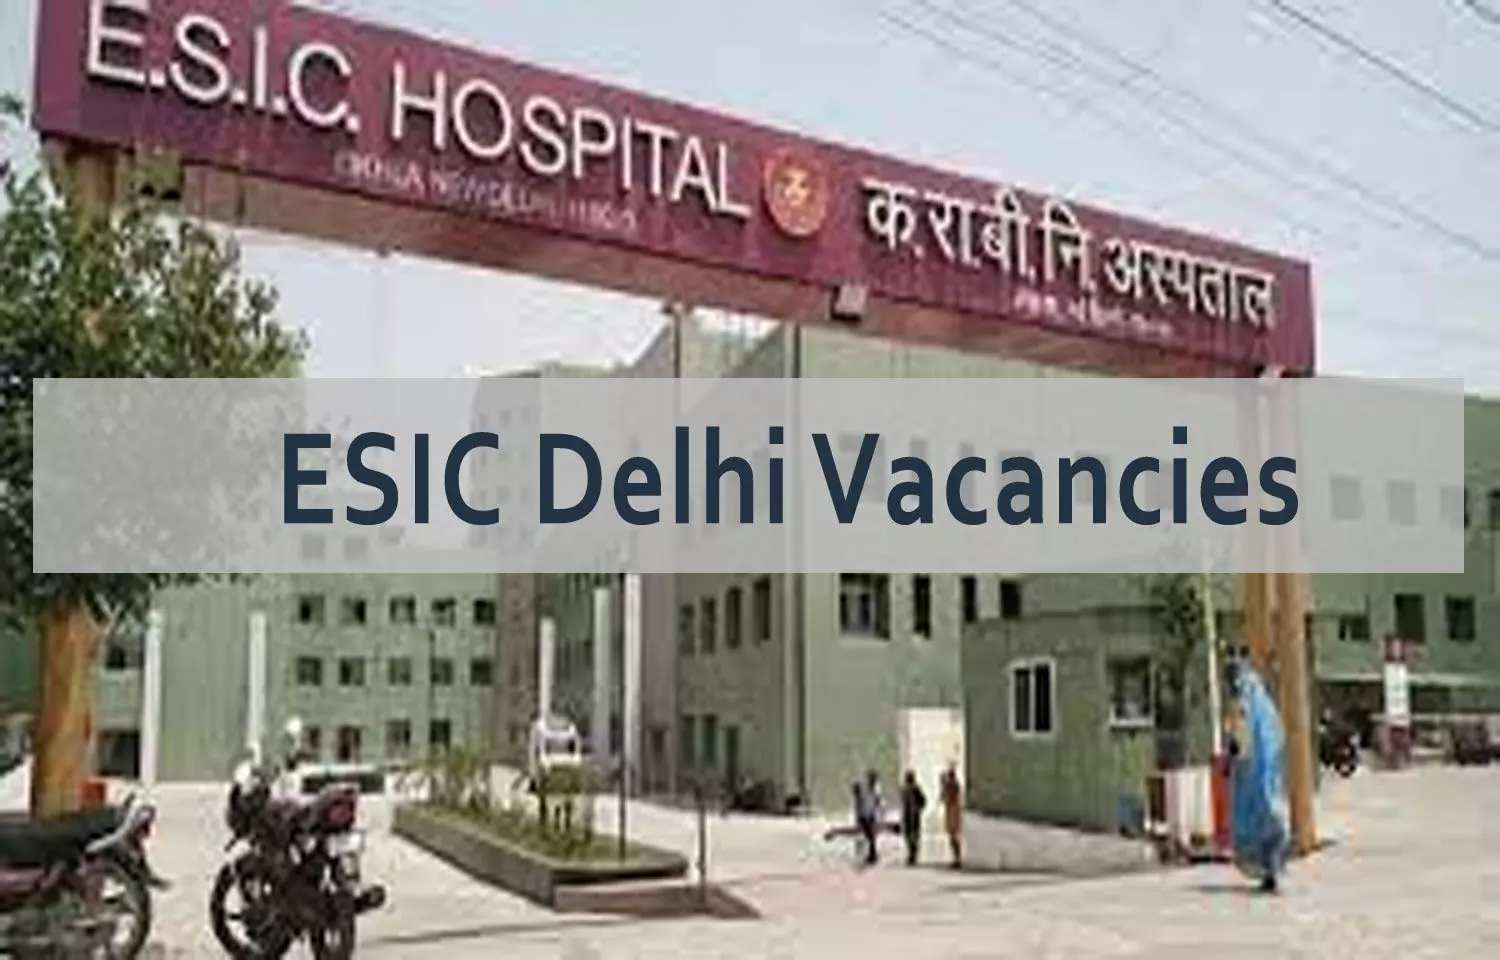 ESIC Hospital Basaidarapur Delhi releases Vacancies For Super Specialists, Embryologist Posts, Apply Now